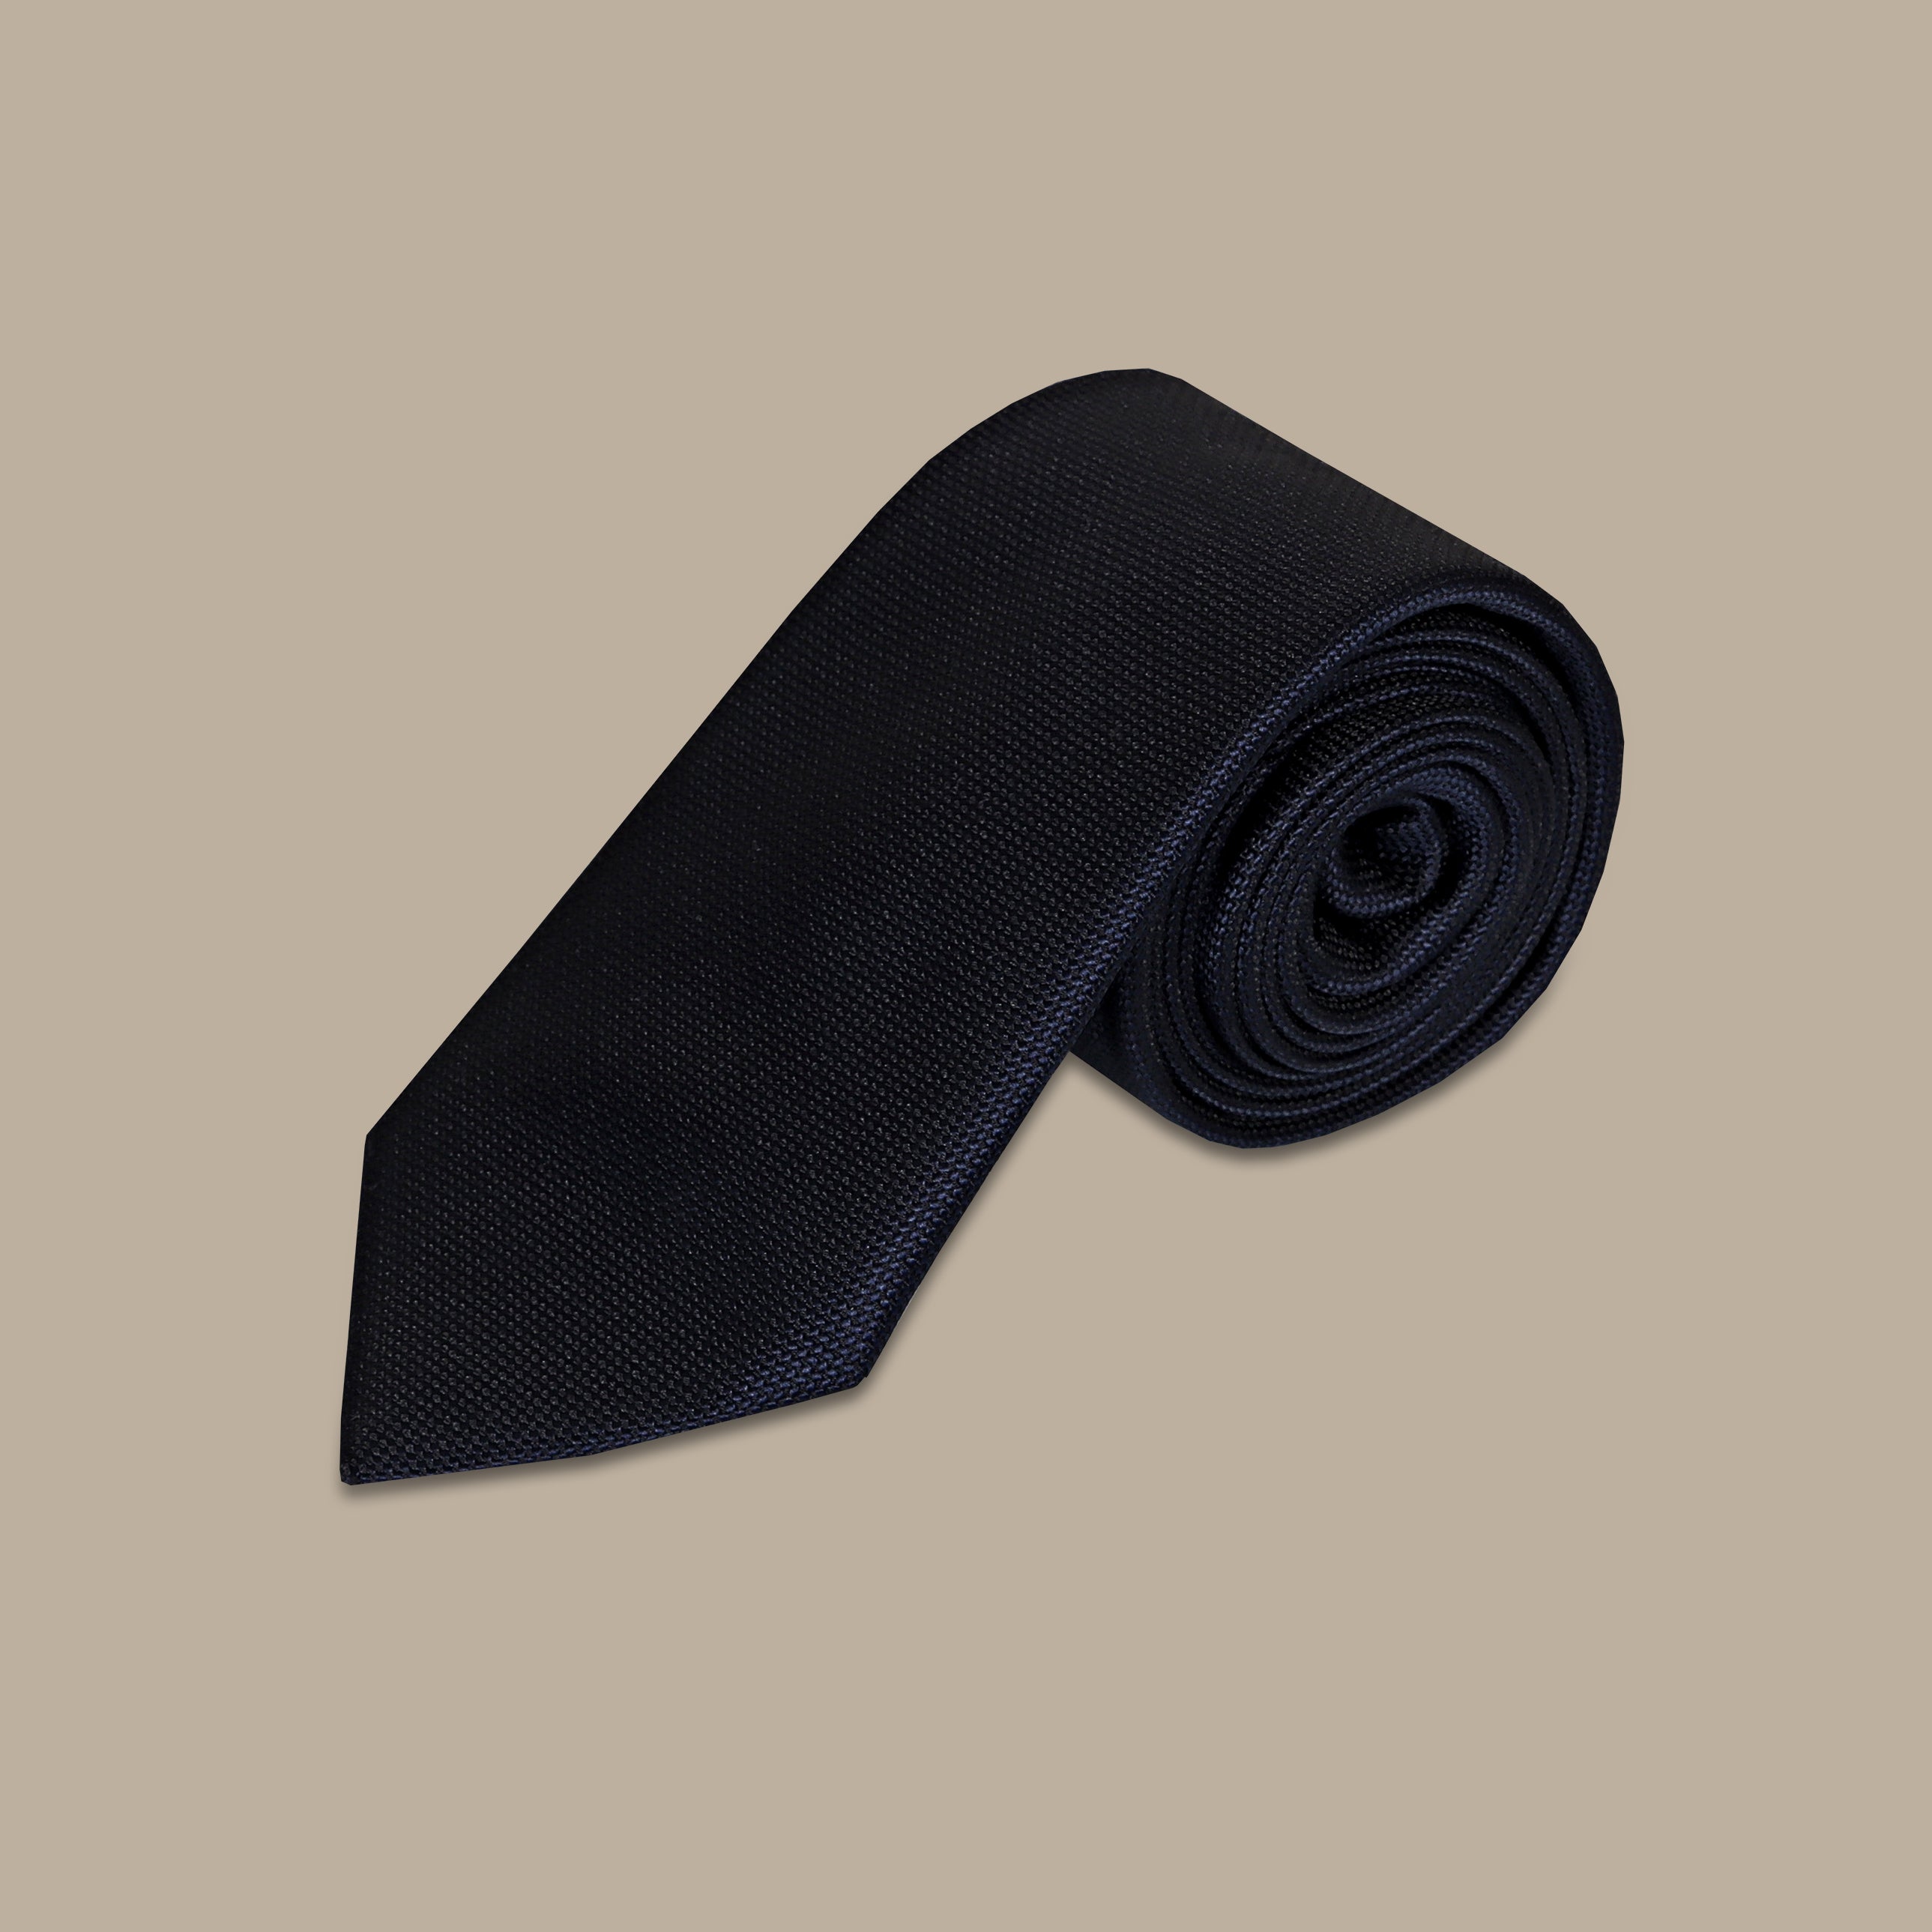 Timeless Navy: Solid Navy Blue Tie Set